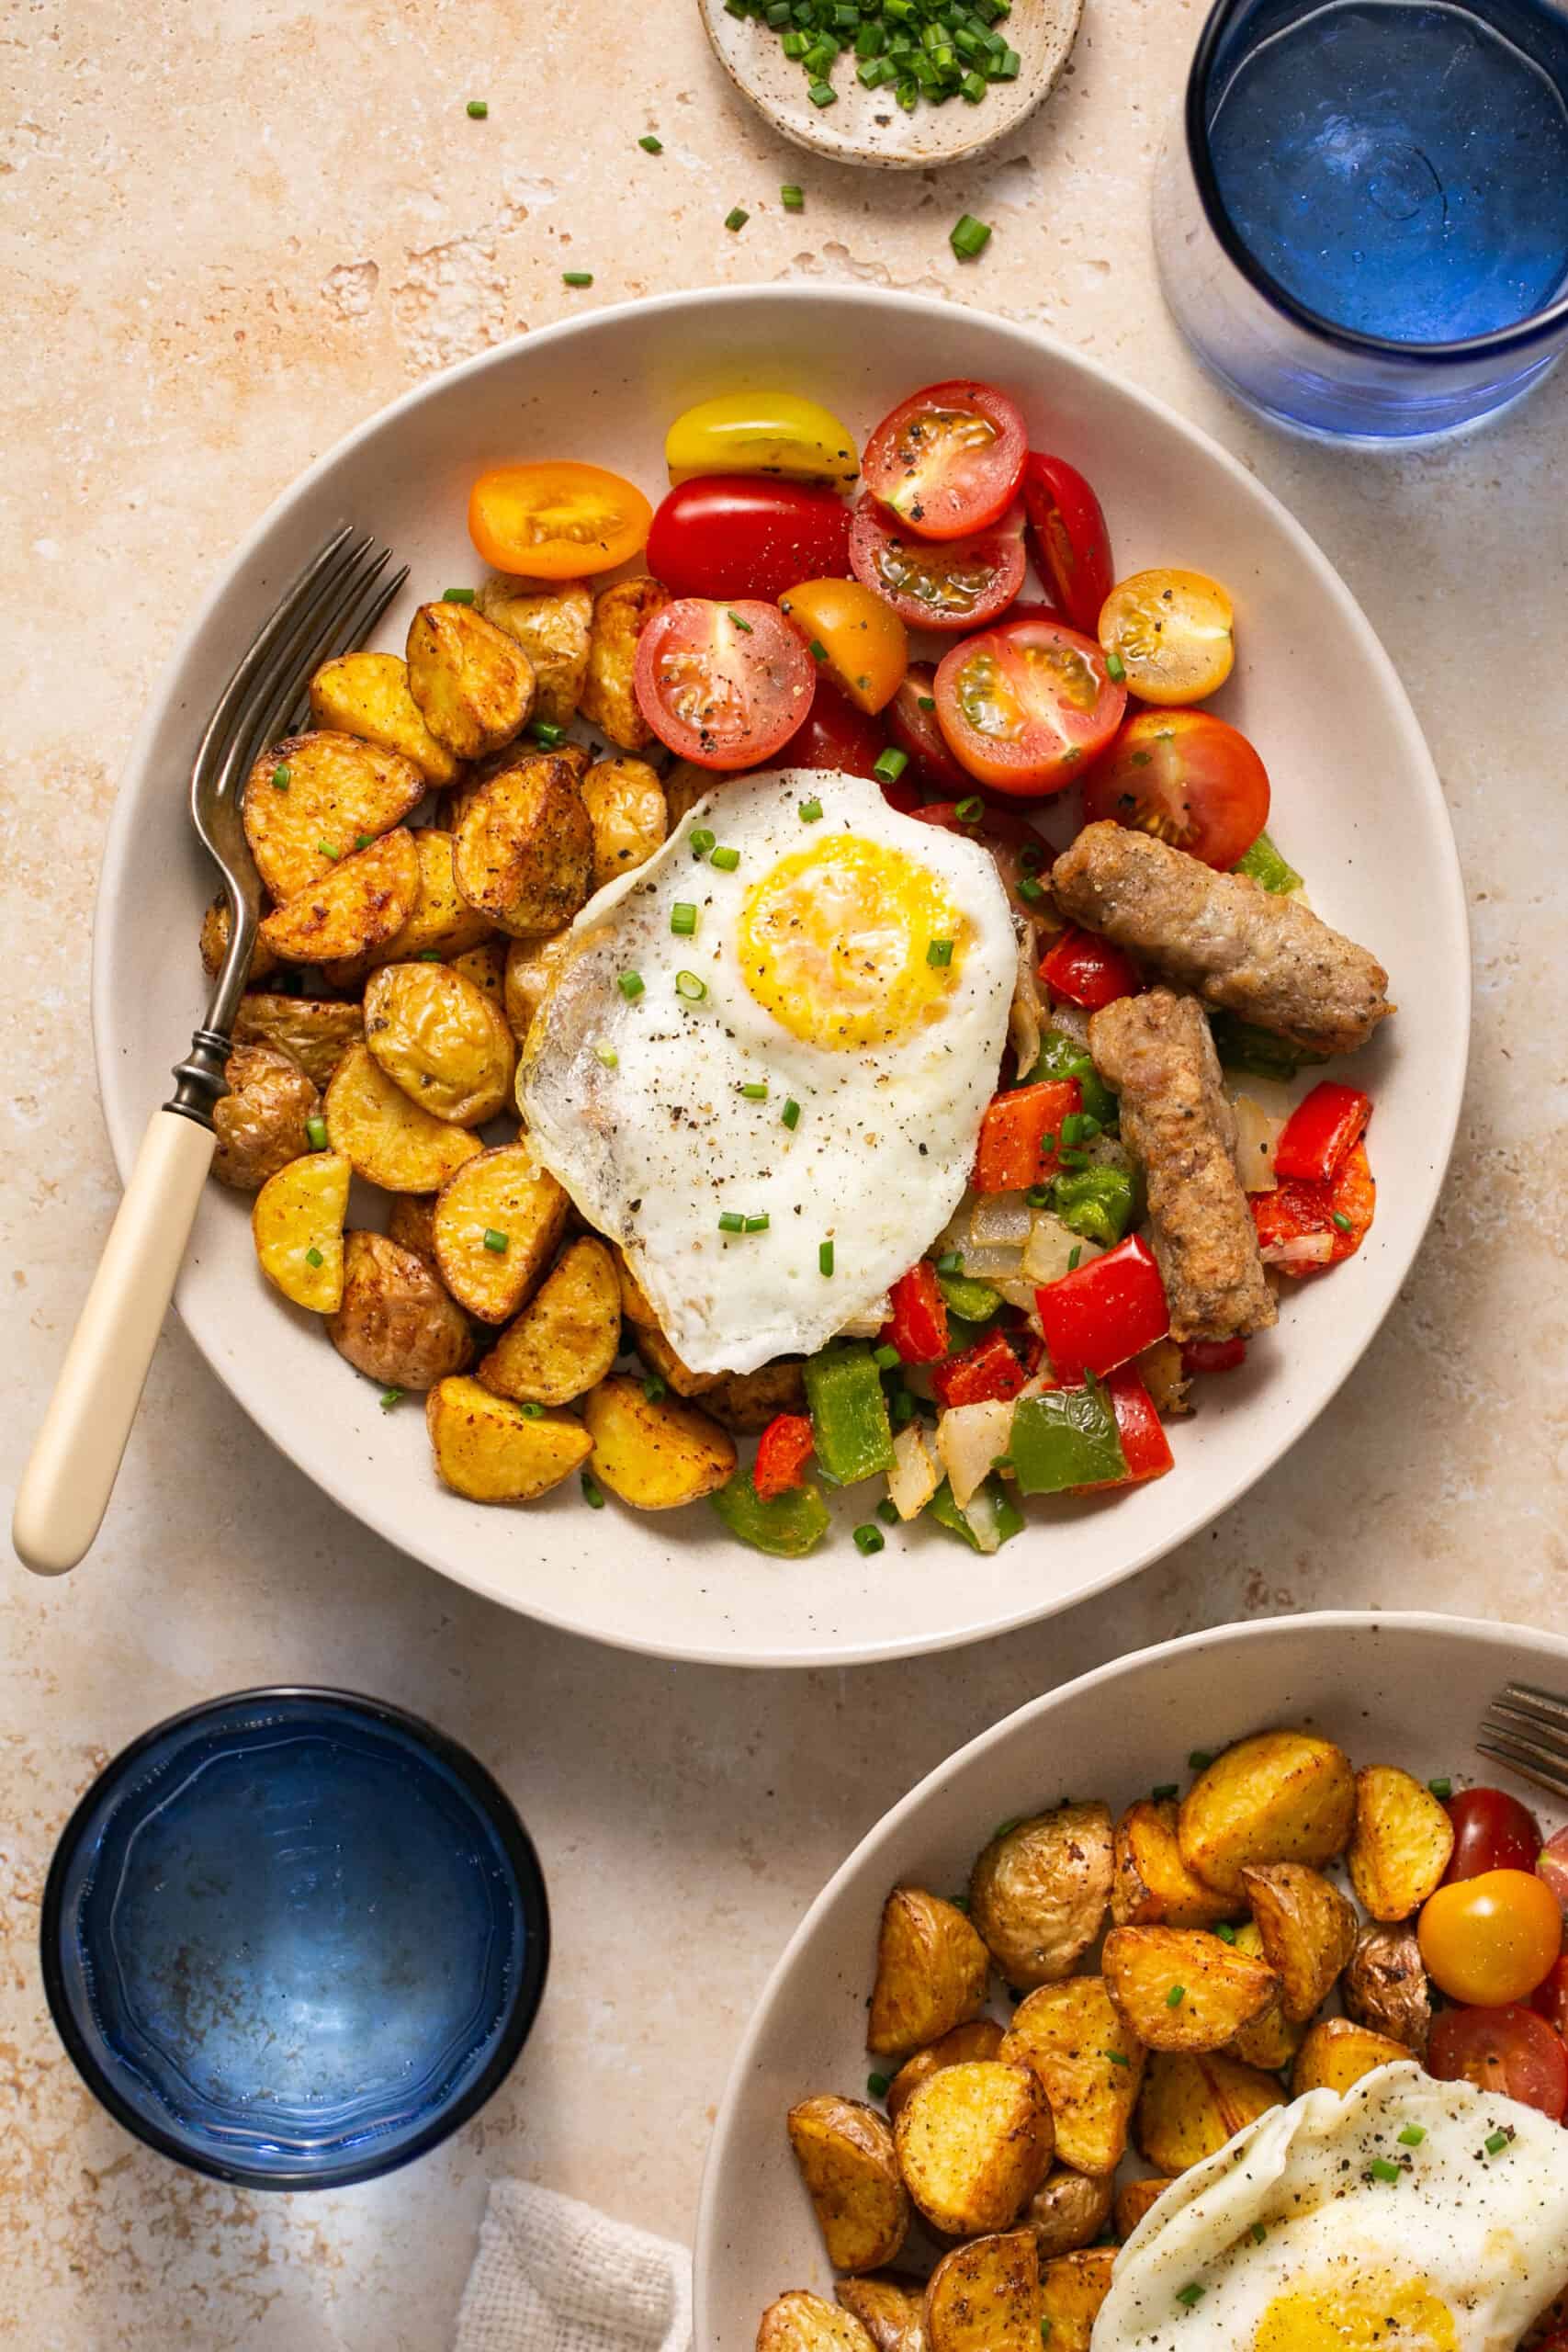 Make These Sausage and Egg Make Ahead Breakfast Bowls